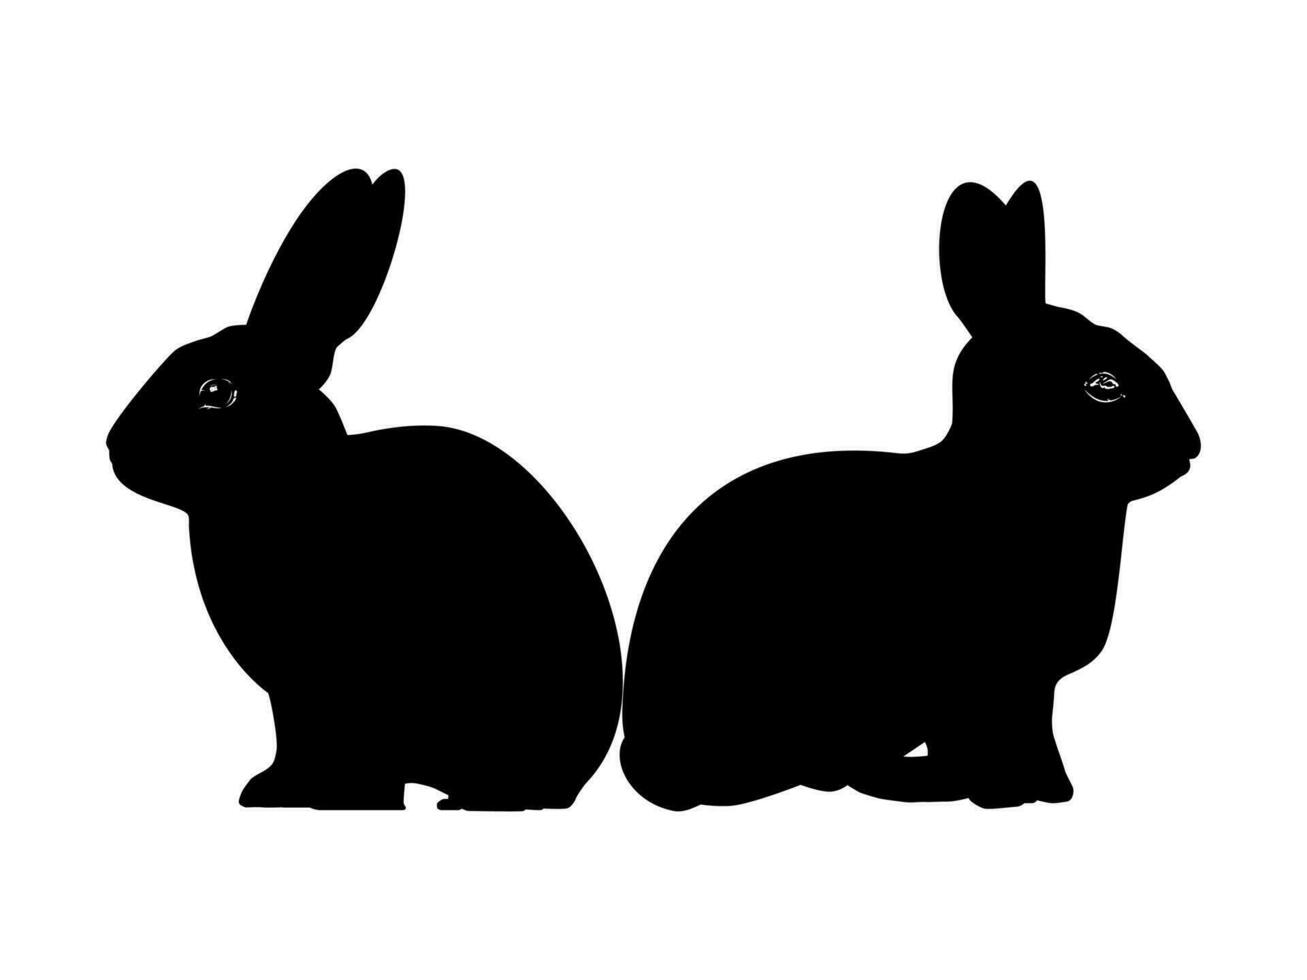 Pair of the Rabbit or Bunny or Hare Silhouette for Art Illustration, Logo Type, Pictogram, Apps, Website or Graphic Design Element. Vector Illustration